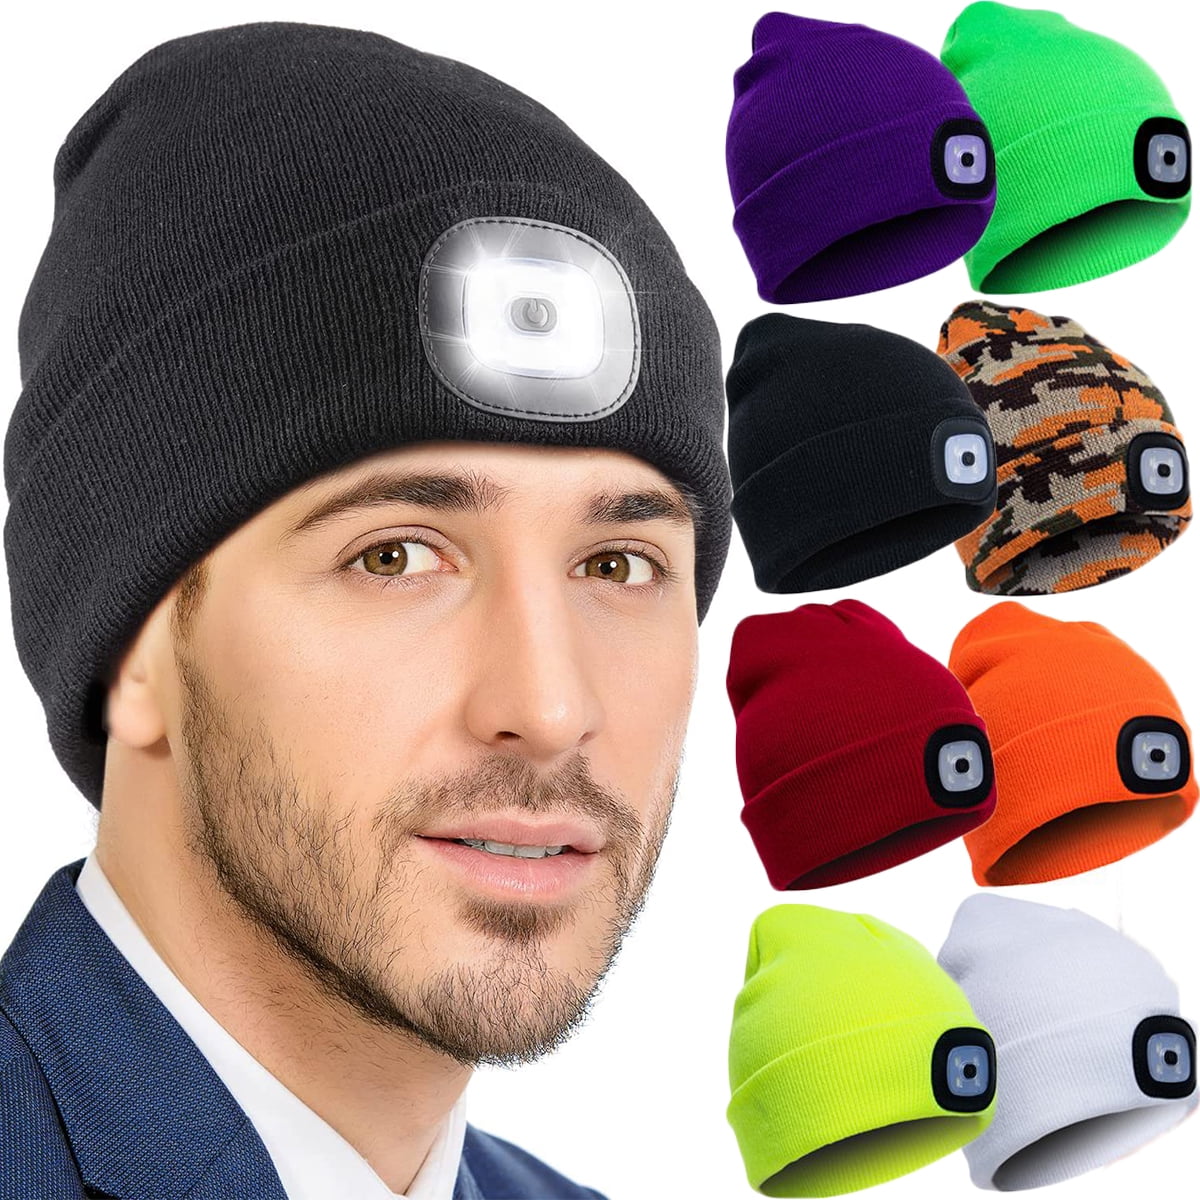 LED Beanie Hat with Light, Unisex Rechargeable LED Headlamp Hat, Warm Knit  Hat, Head Light for Outdoor Dog Walking,Gifts for Men Women Dad 